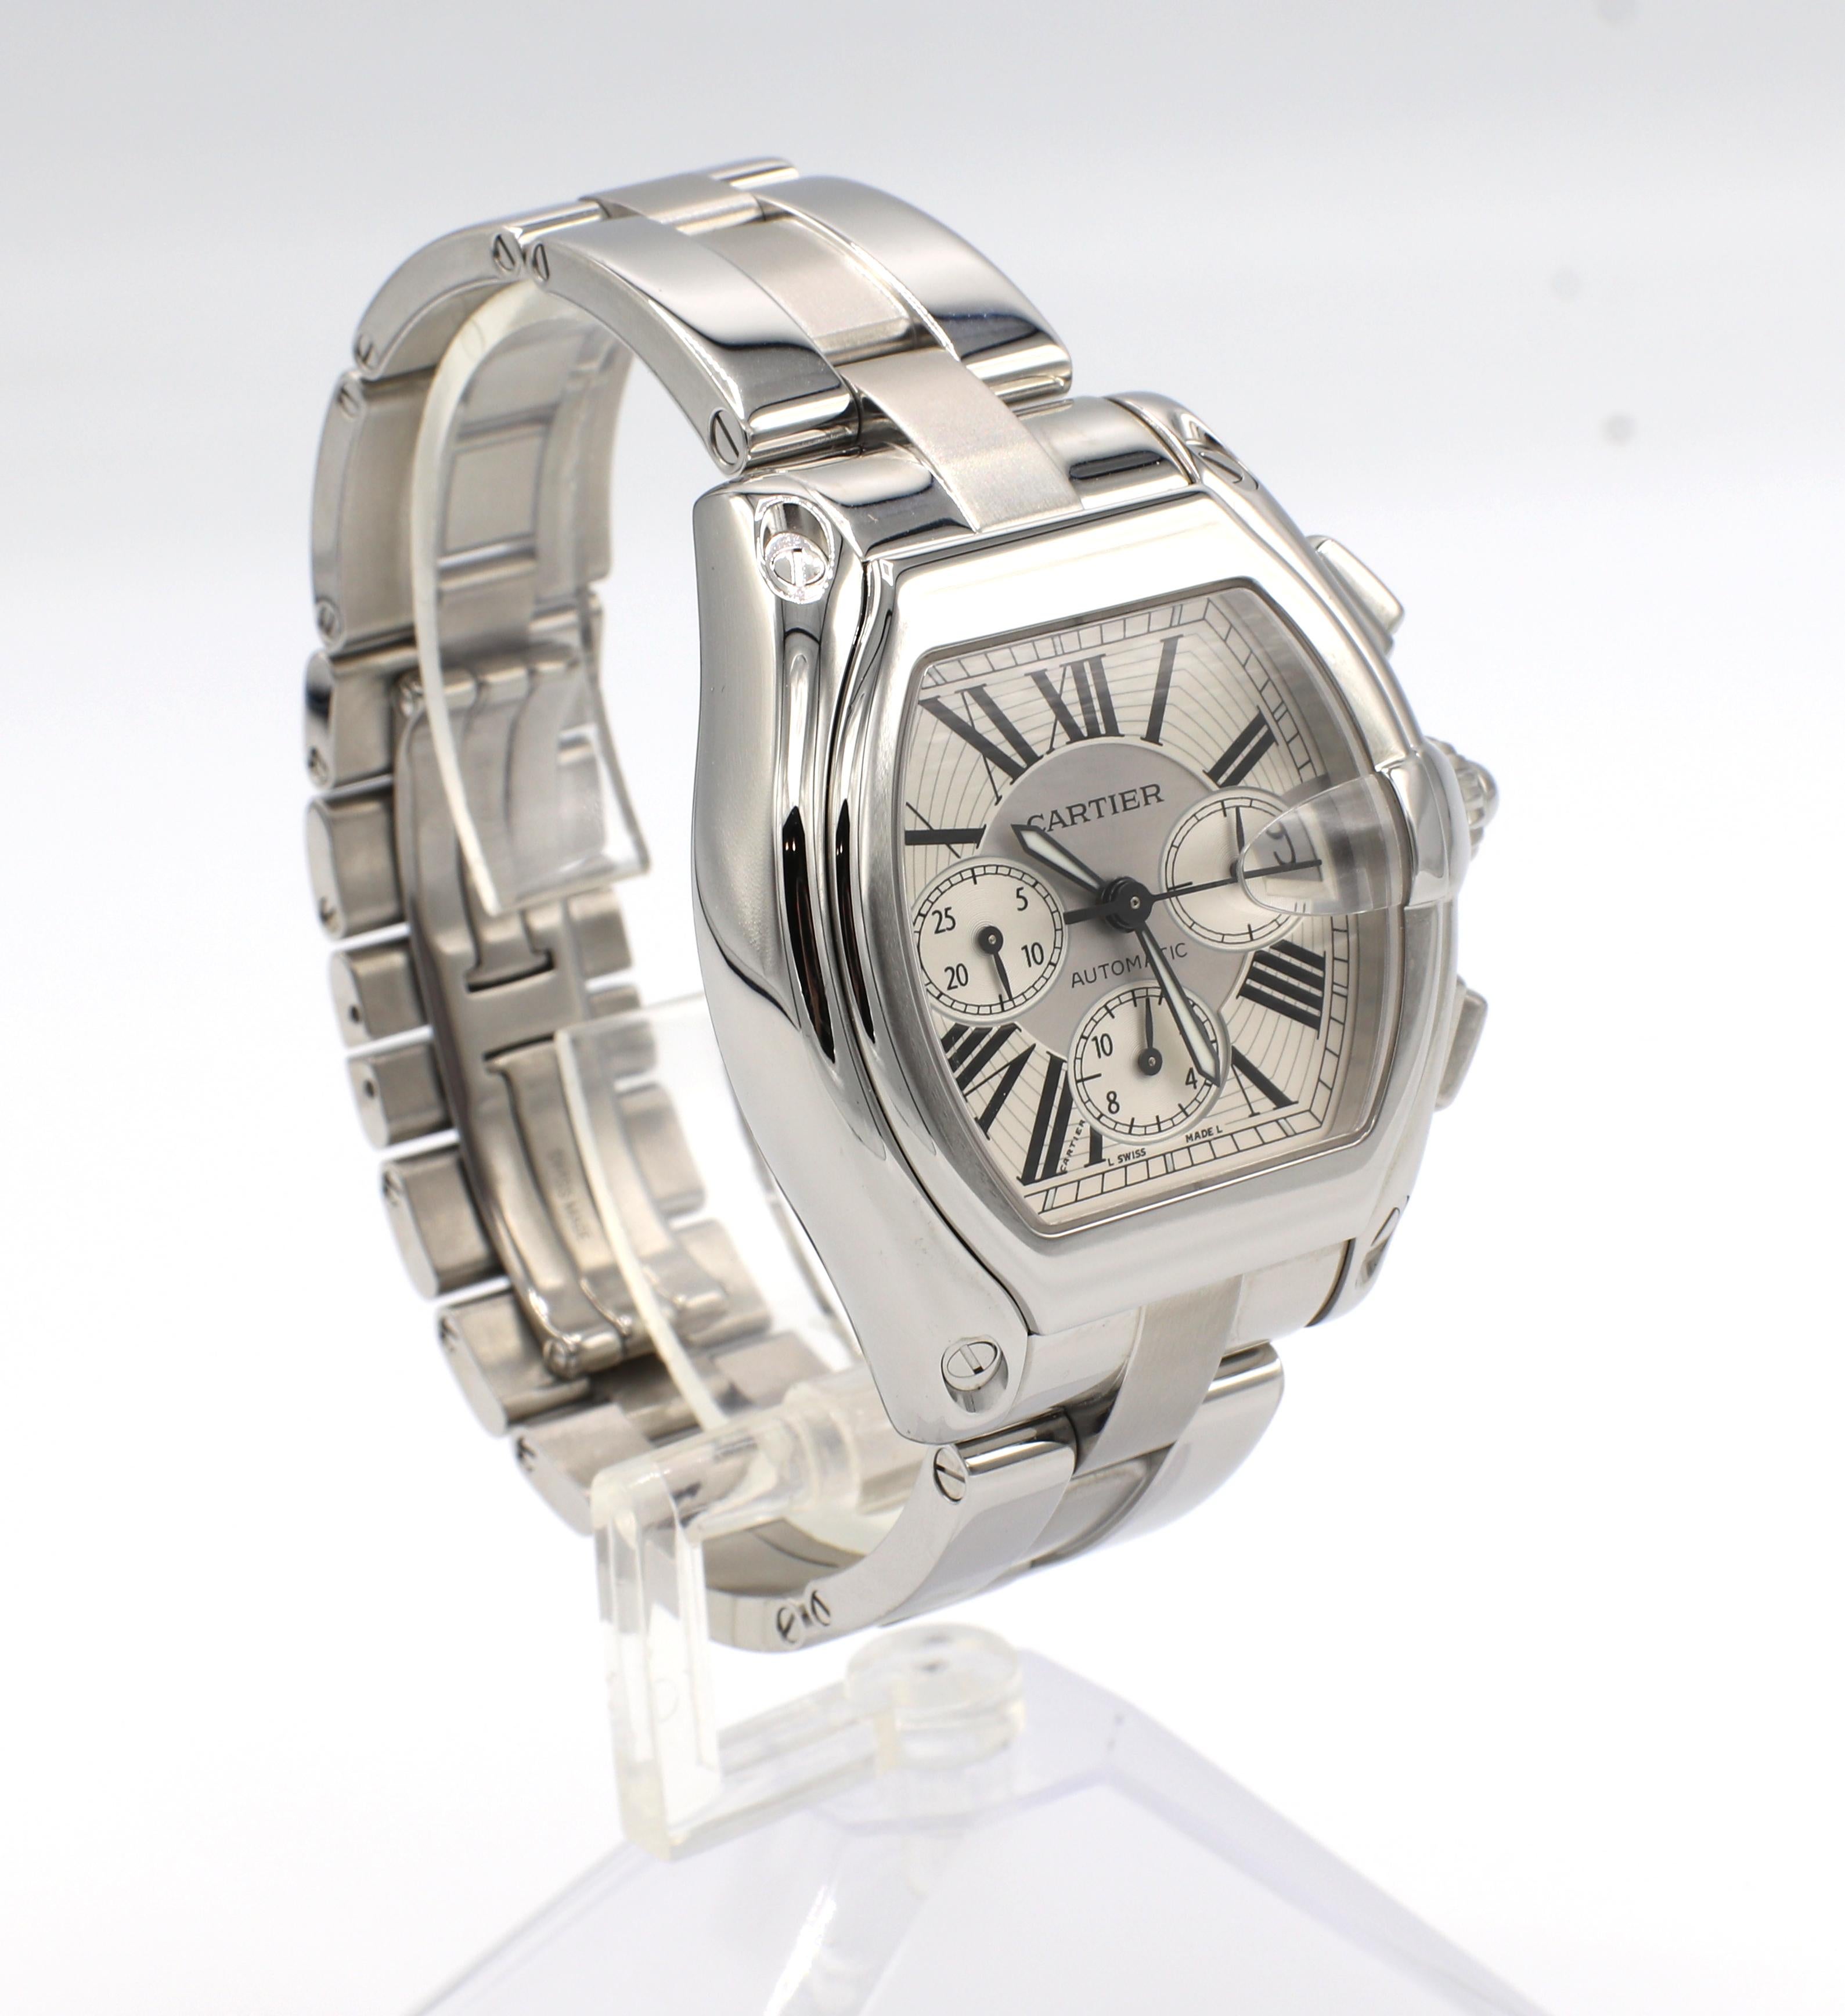 Cartier Roadster 2618 Automatic Stainless Steel Chronograph Watch 
Model: 2618 W62019X6
Case: 43 x 48mm
Metal: Stainless steel
Movement: Automatic
Features: Date, chronograph
Crystal: Sapphire
Dial: Silver 
Fits approx. 7.75